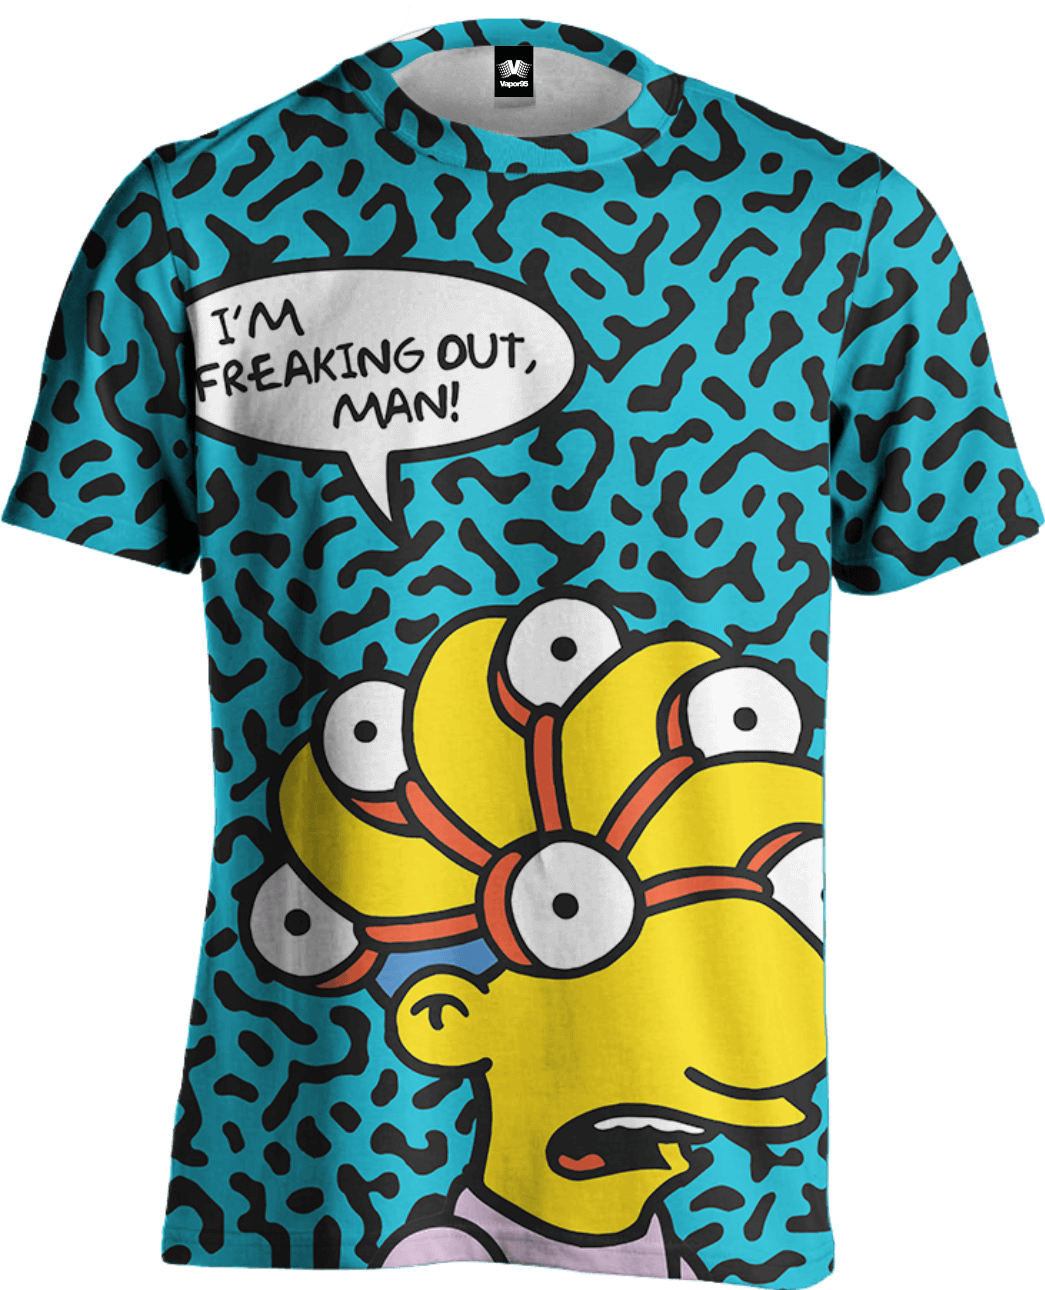 Freaking Out Tee All Over Print Tee T6